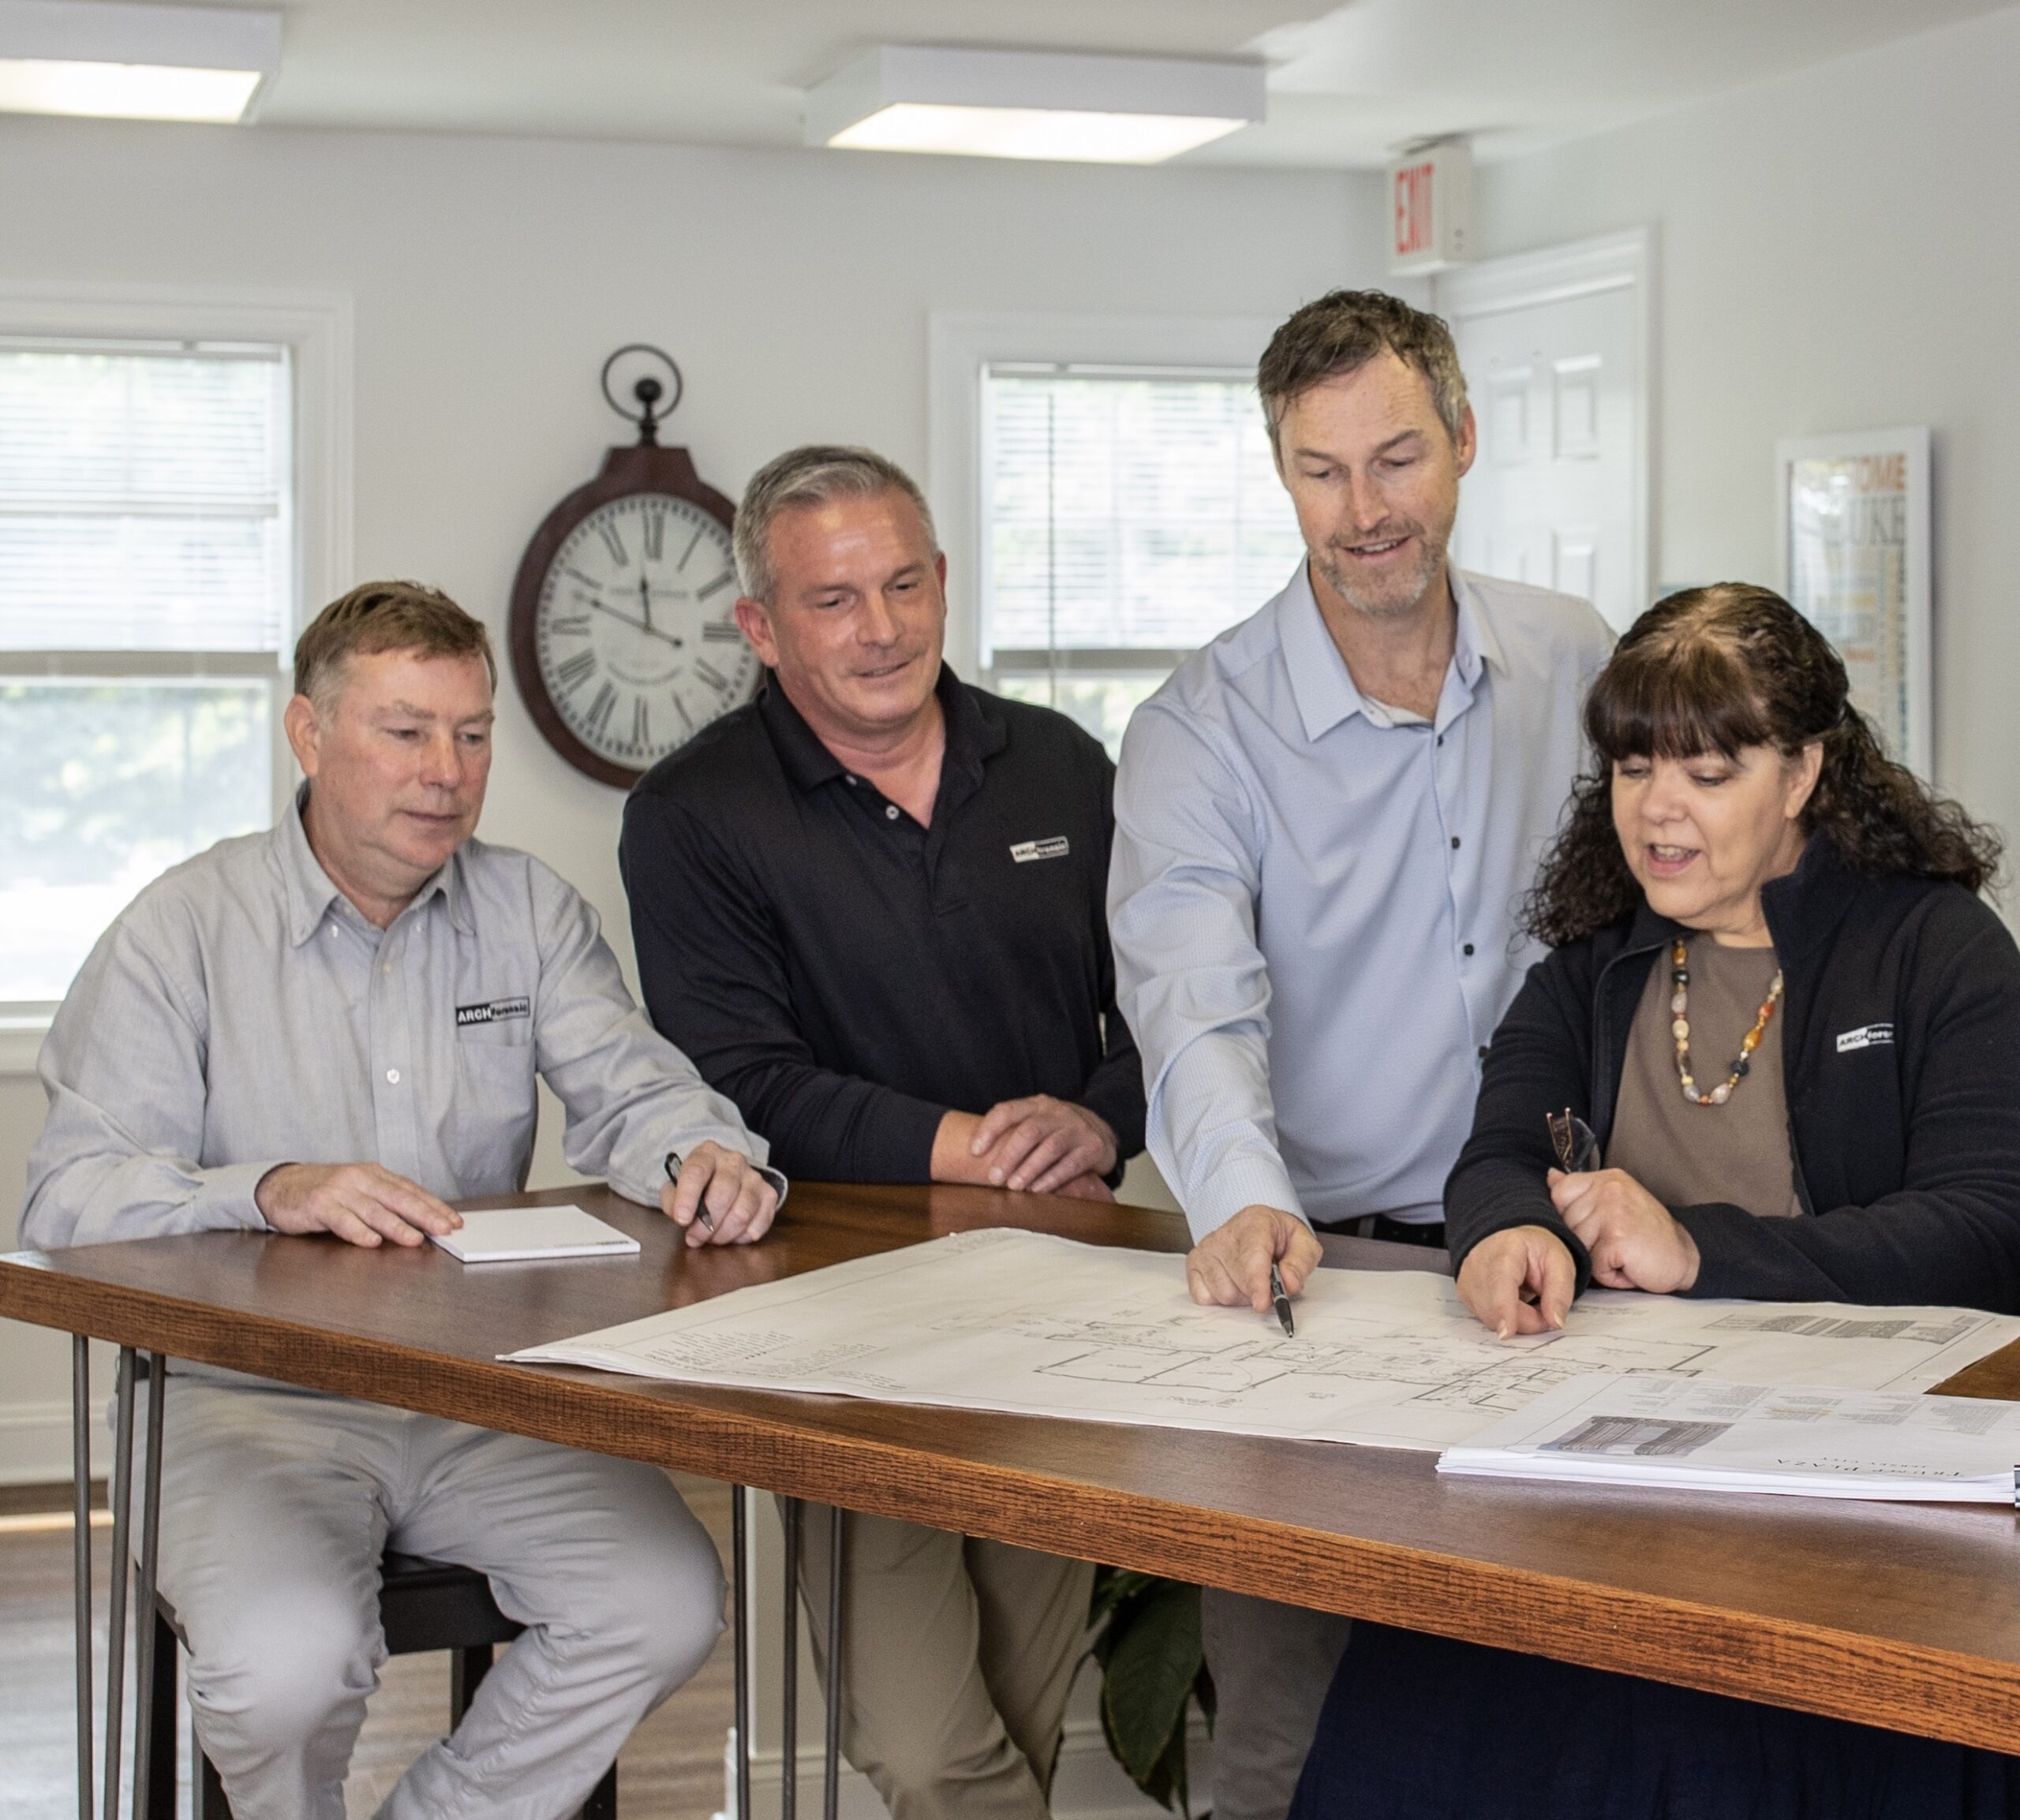 Christopher D. Ling, AIA, NCARB, Timothy P. Ronan, Mark Cable, AIA and Cindy Maselko reviewing architectural drawings and construction documentation in the office